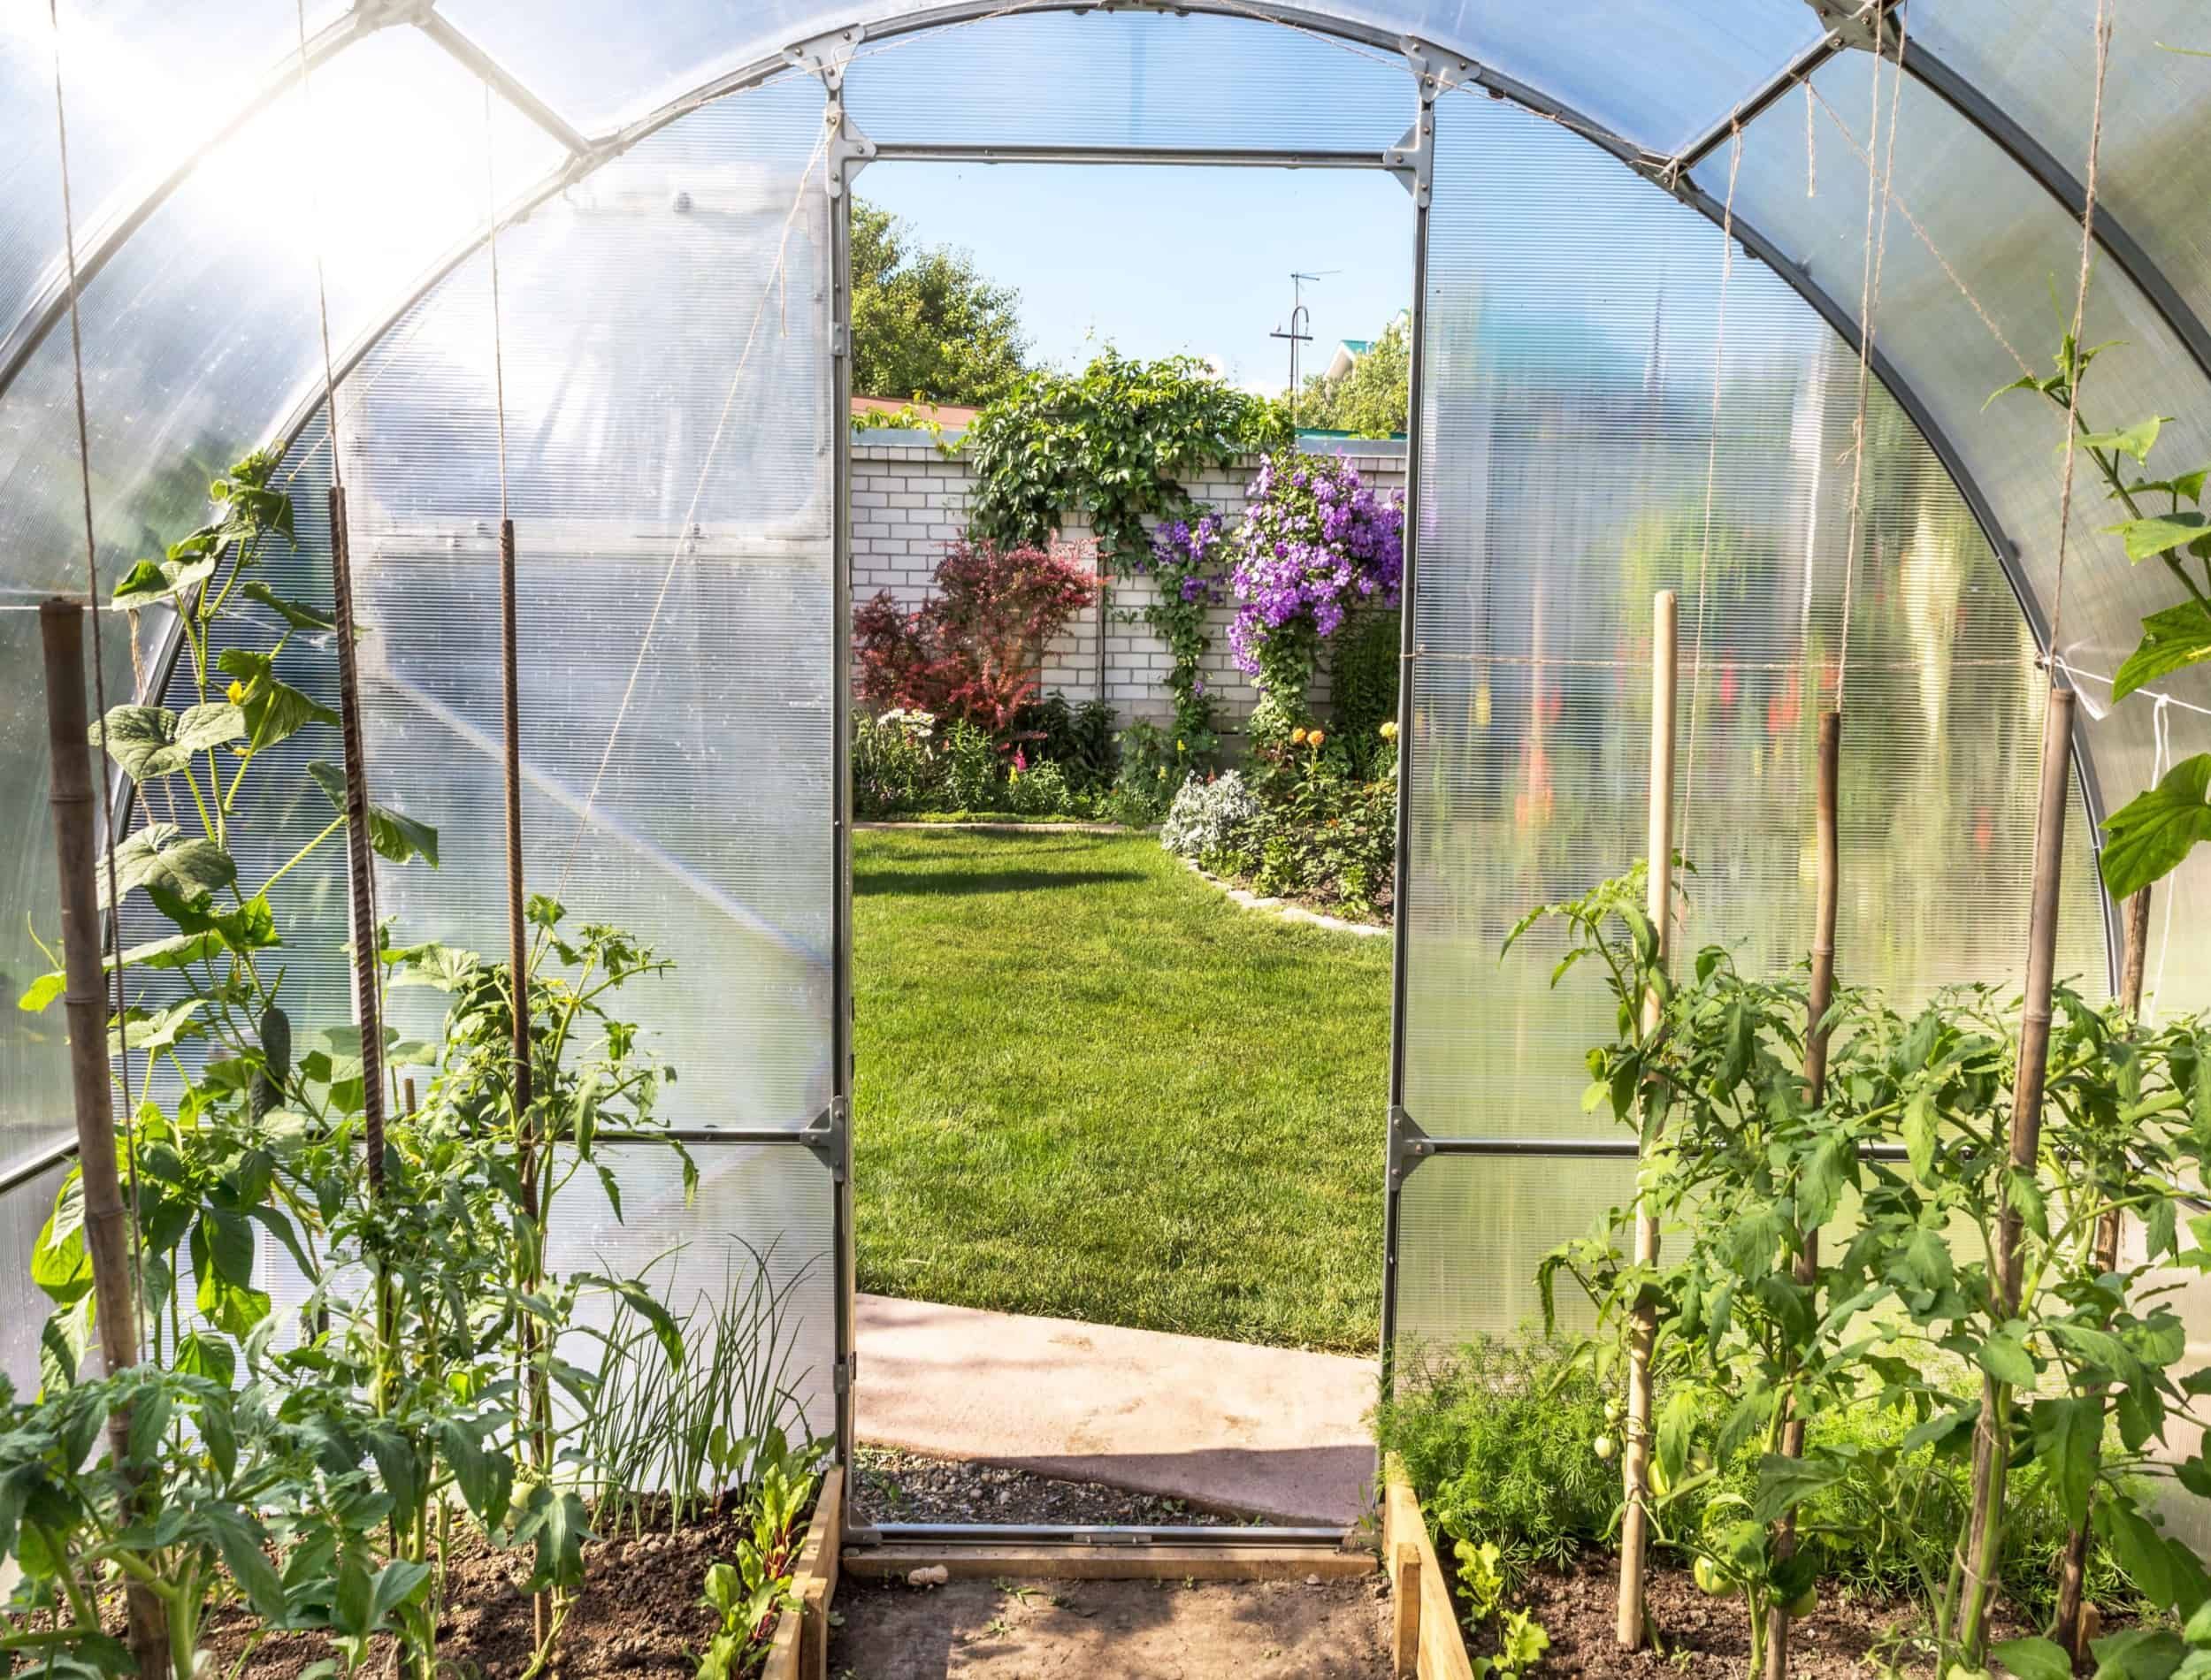 Plants growing in a translucent domed greenhouse or tunnel with a view from inside through the open door onto a pretty formal garden